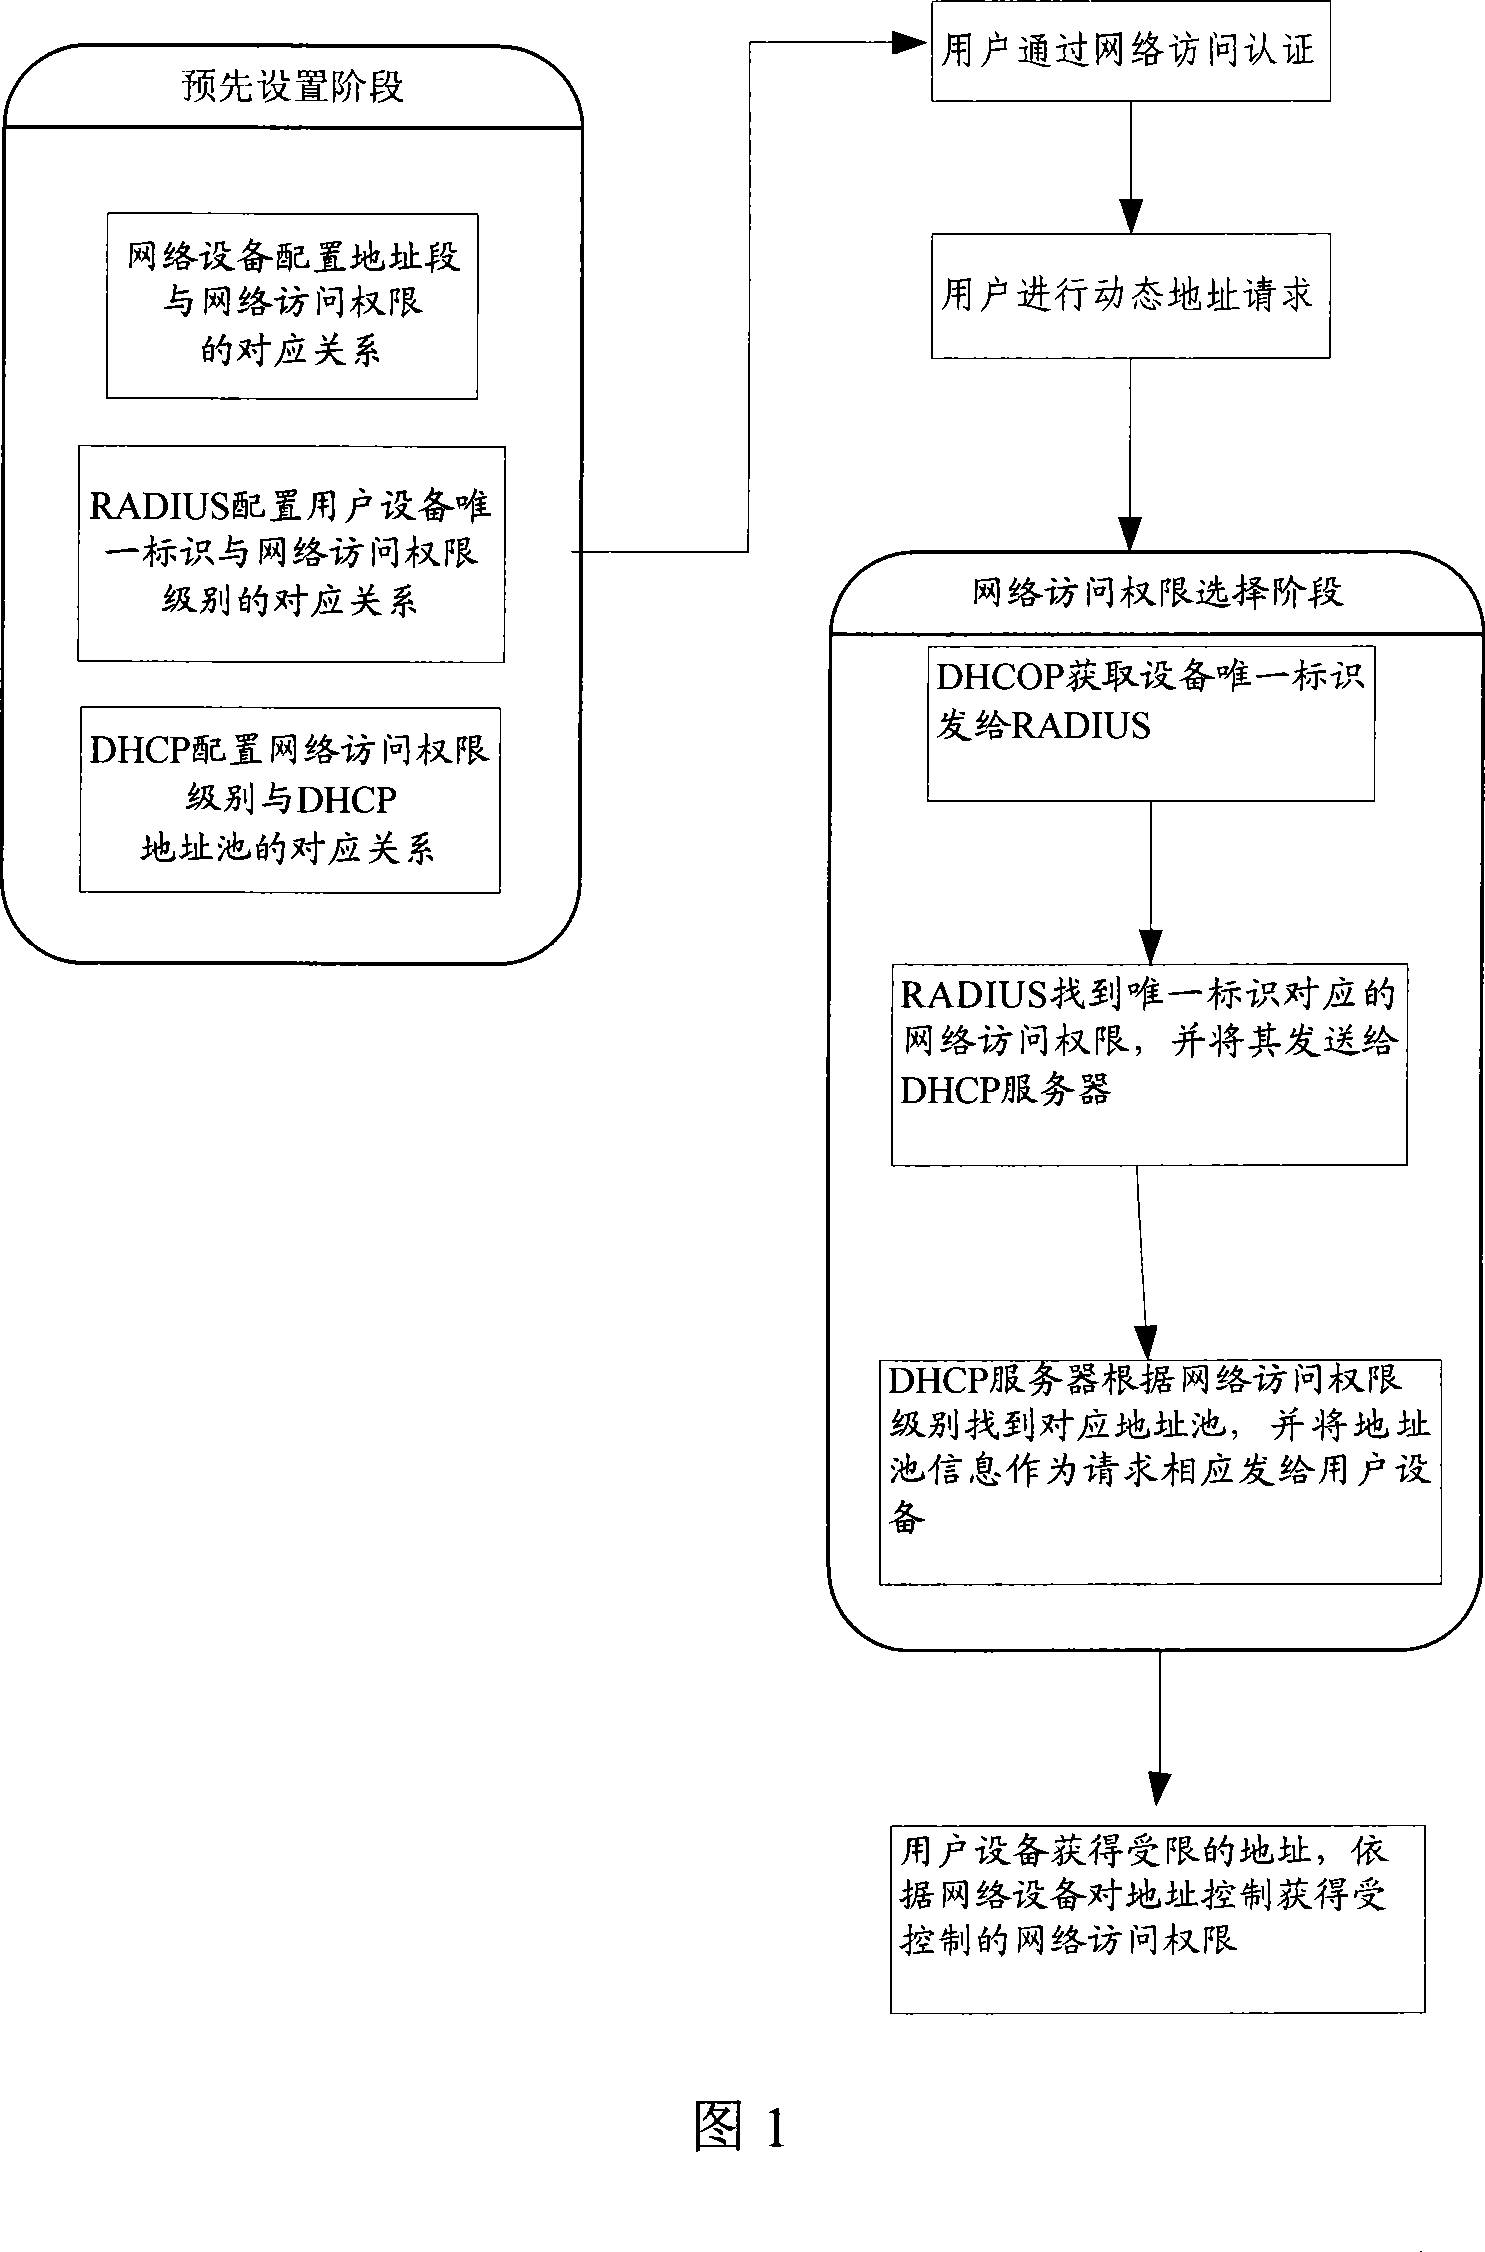 A method and system for controlling the user network access right